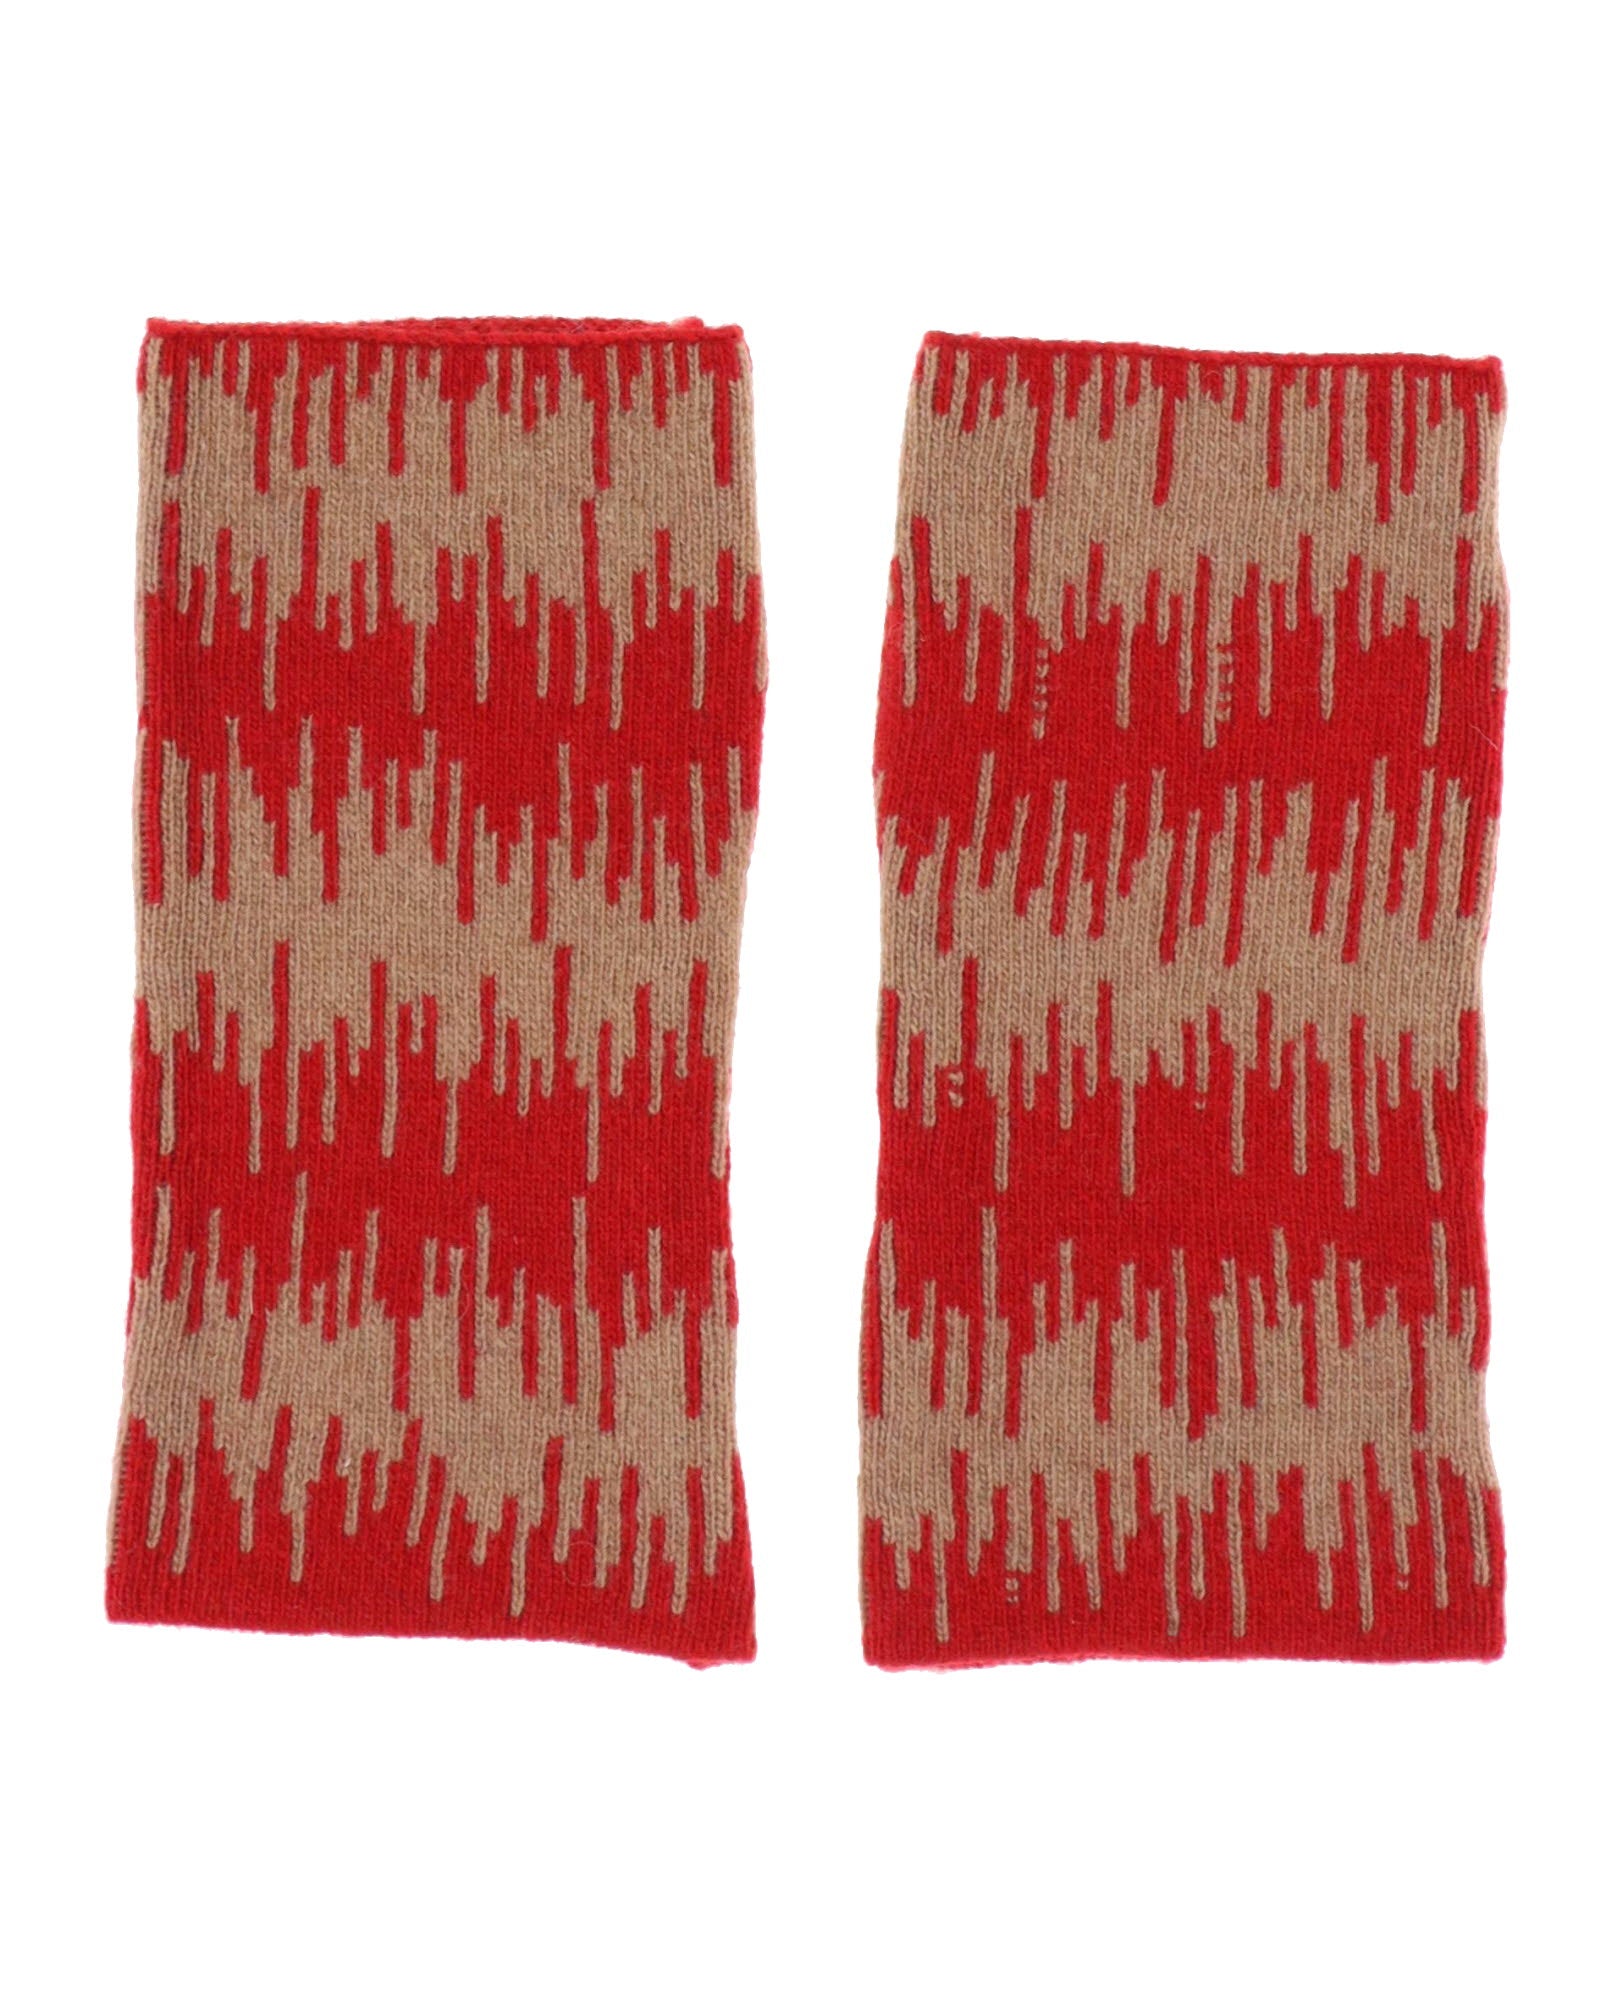 Cashmere Blend Wave Wrist Warmers Venetian Red and Camel